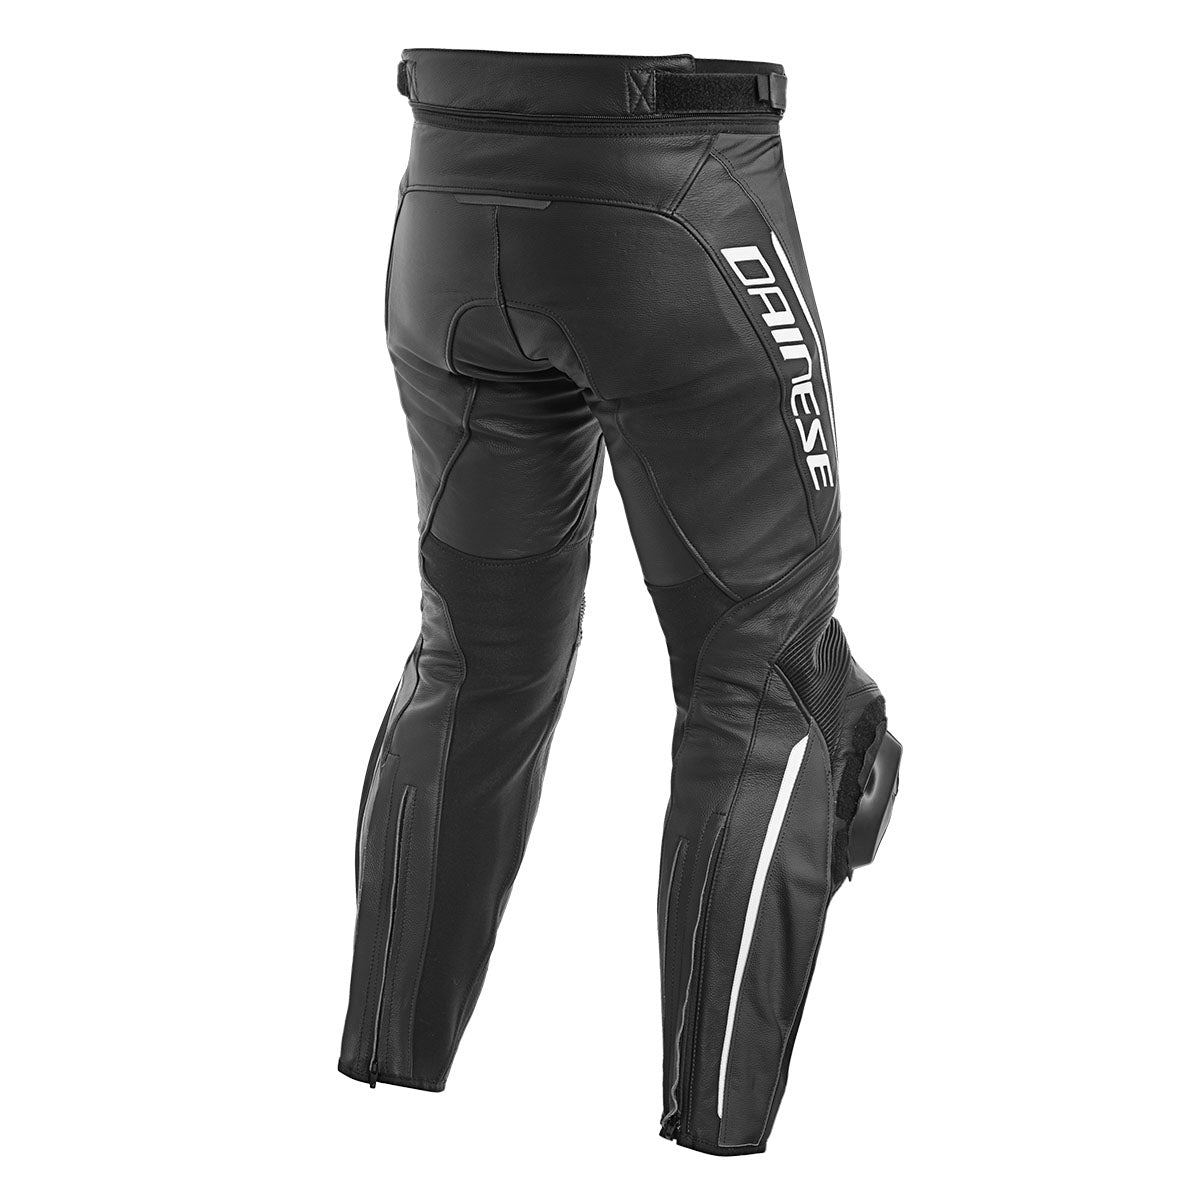 DELTA 3 PERF. LEATHER PANTS